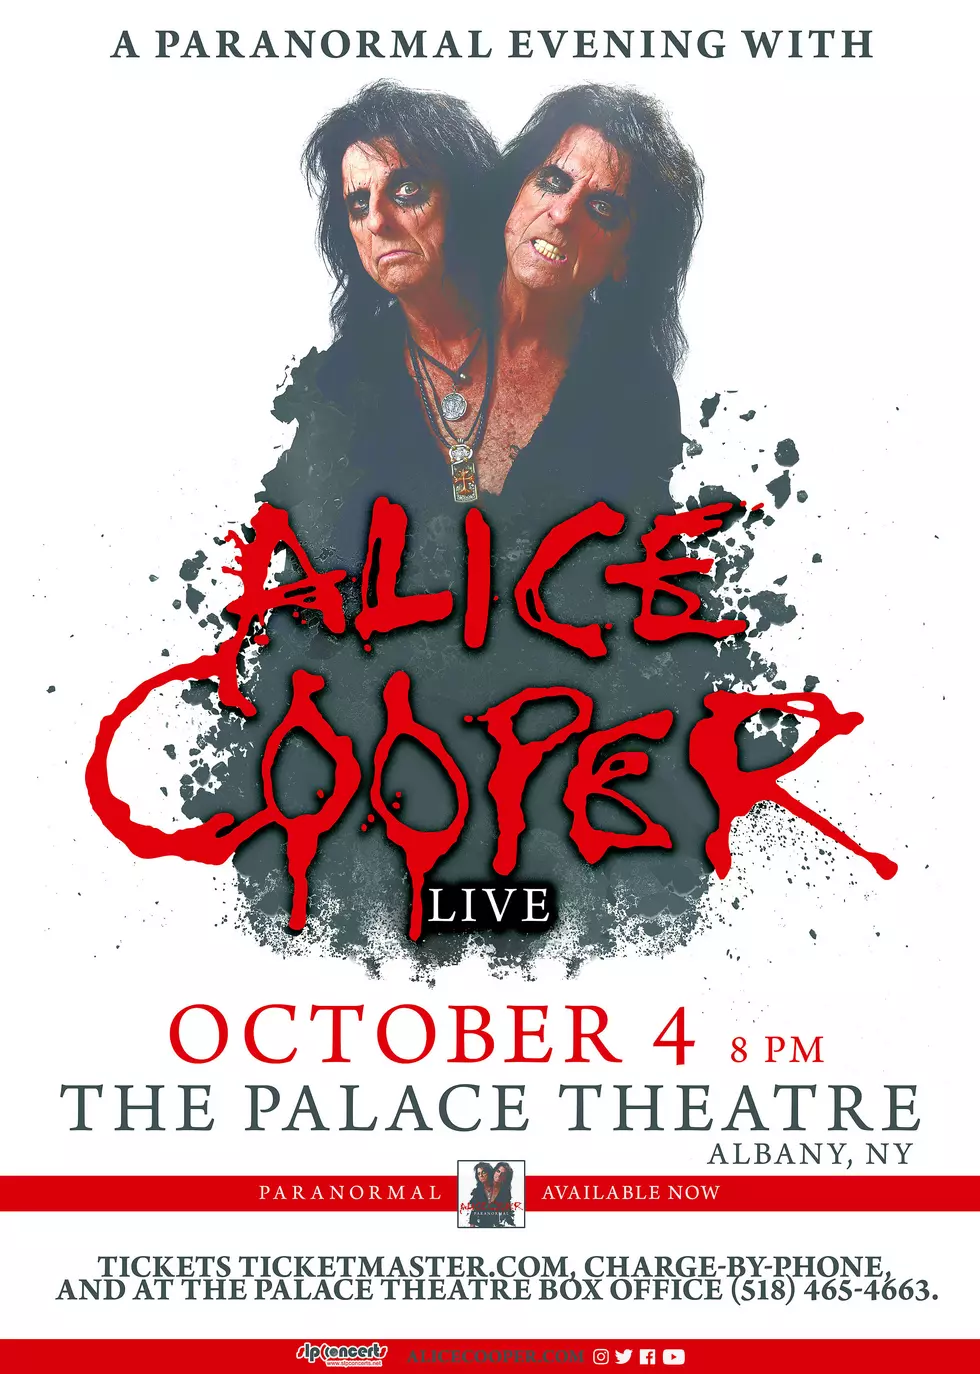 Win Tickets to See a Paranormal Evening with Alice Cooper 